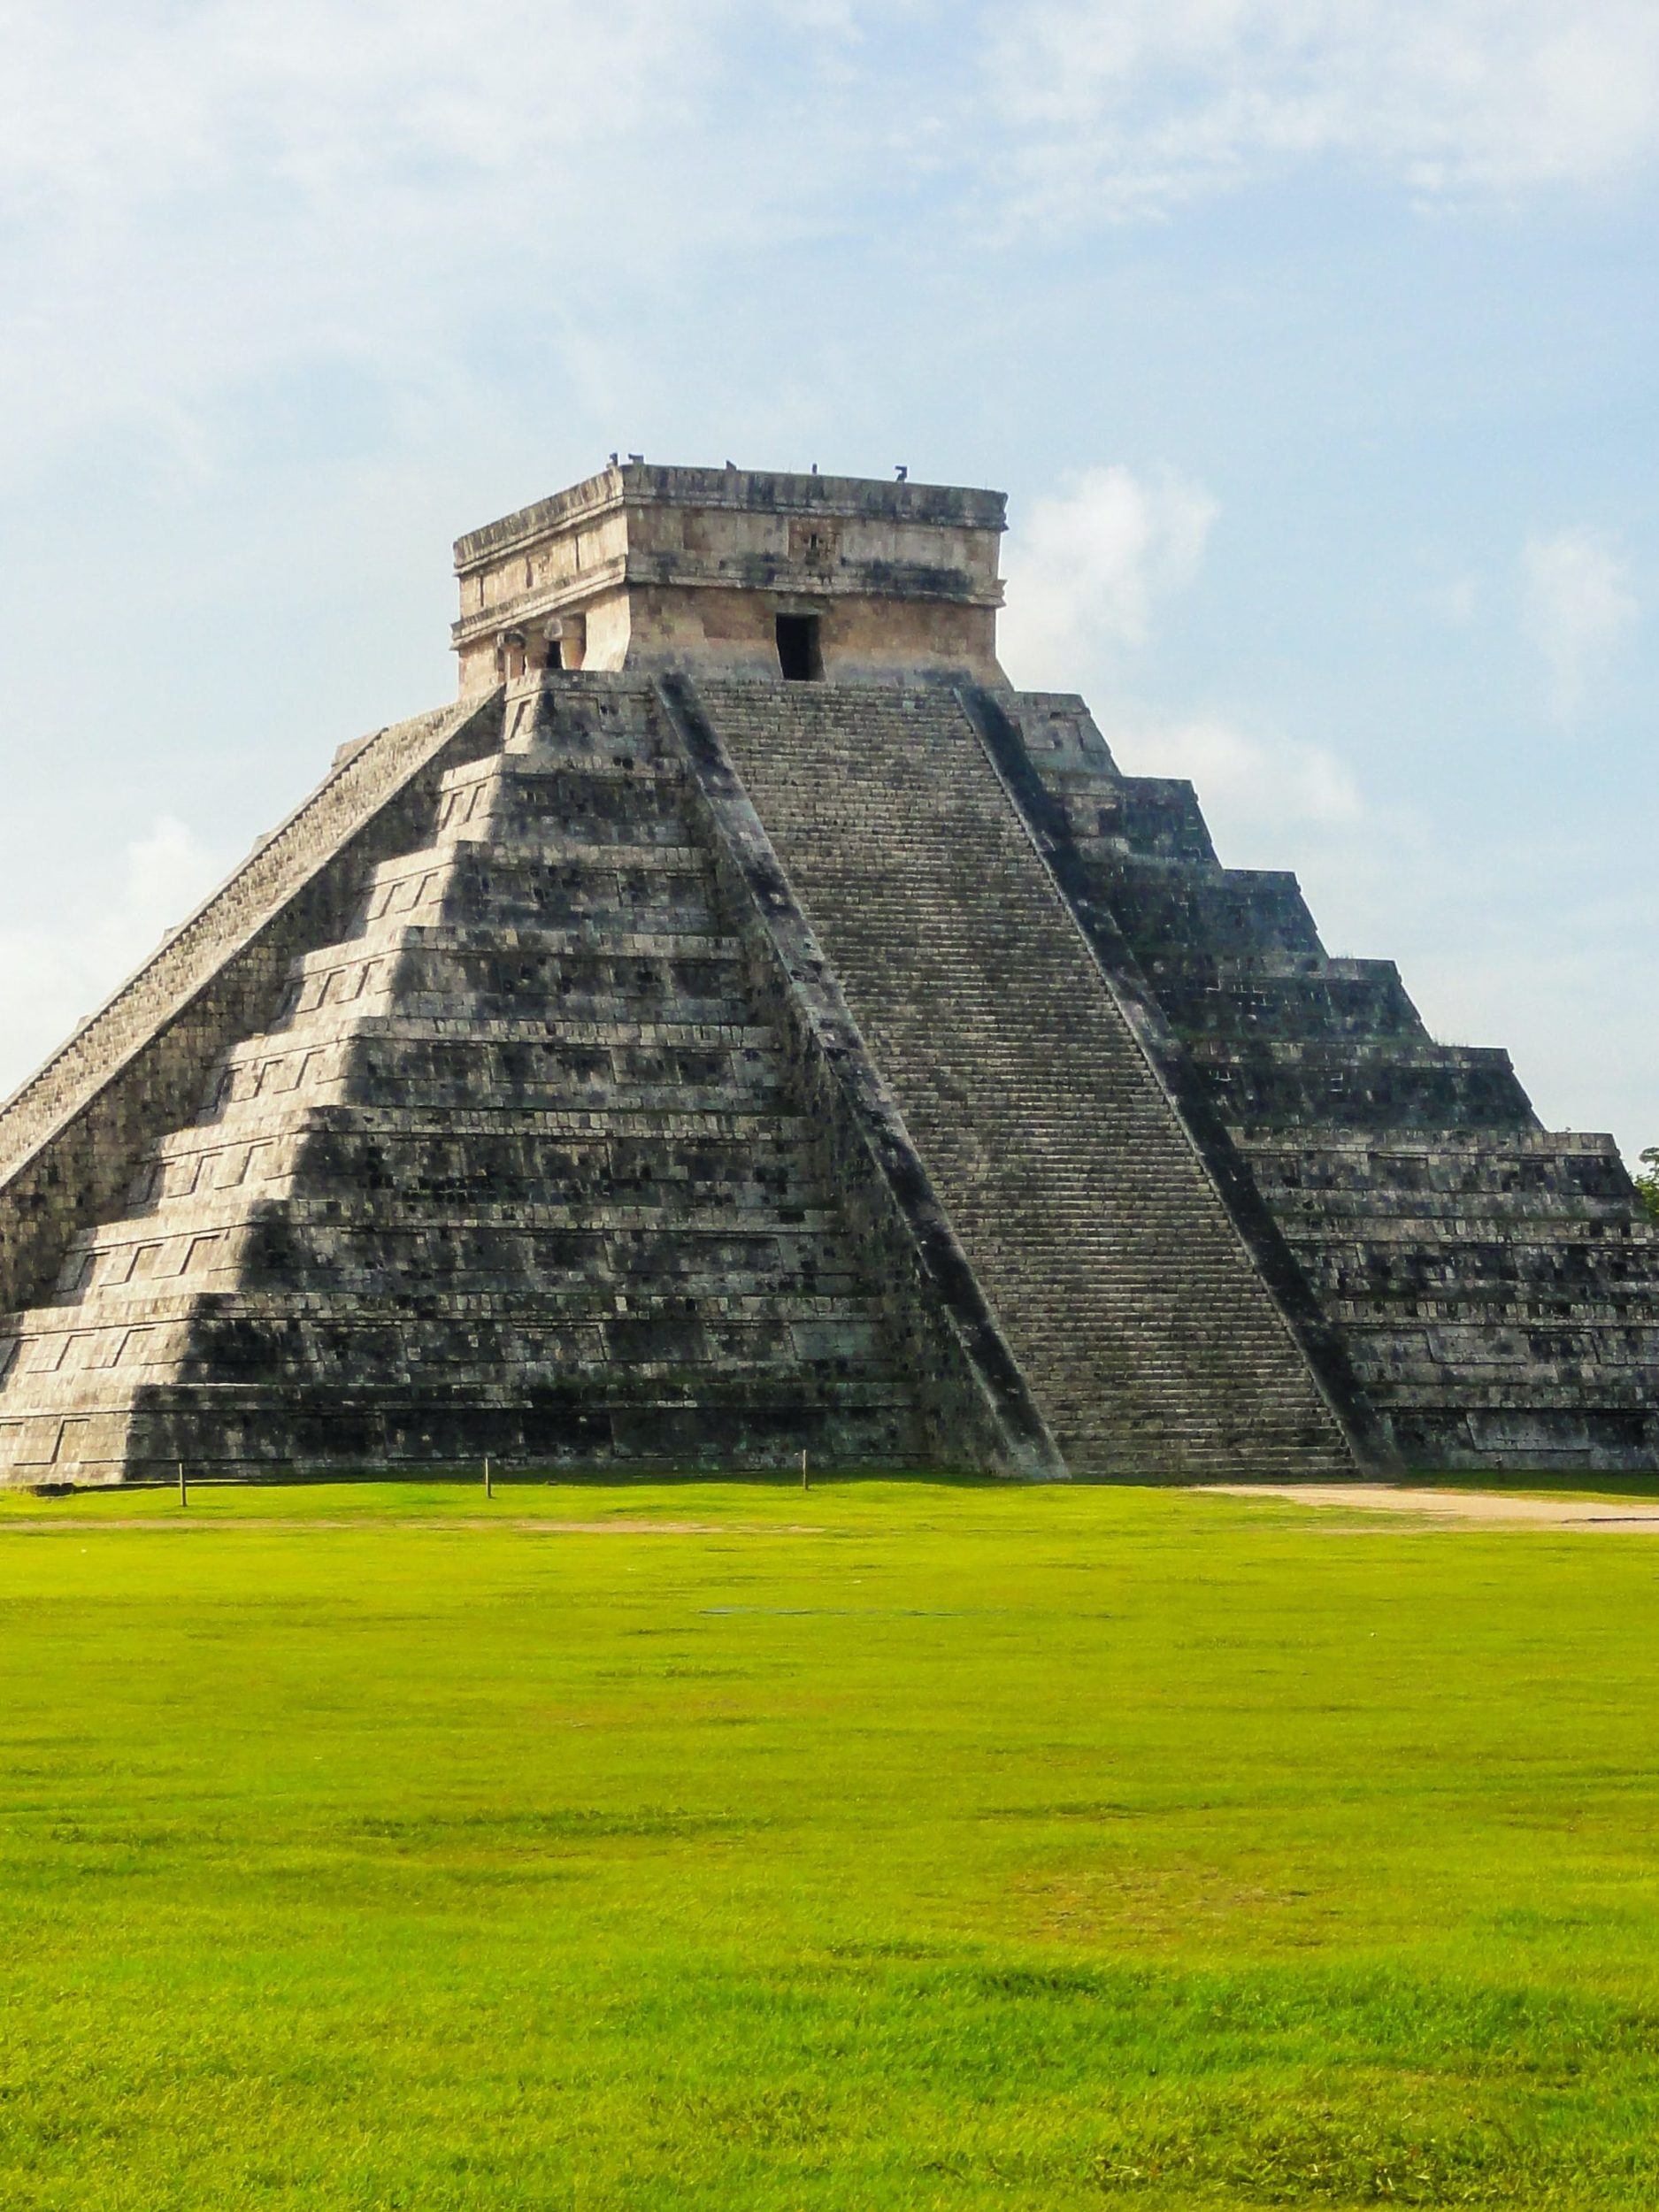 mayan mexico places to visit